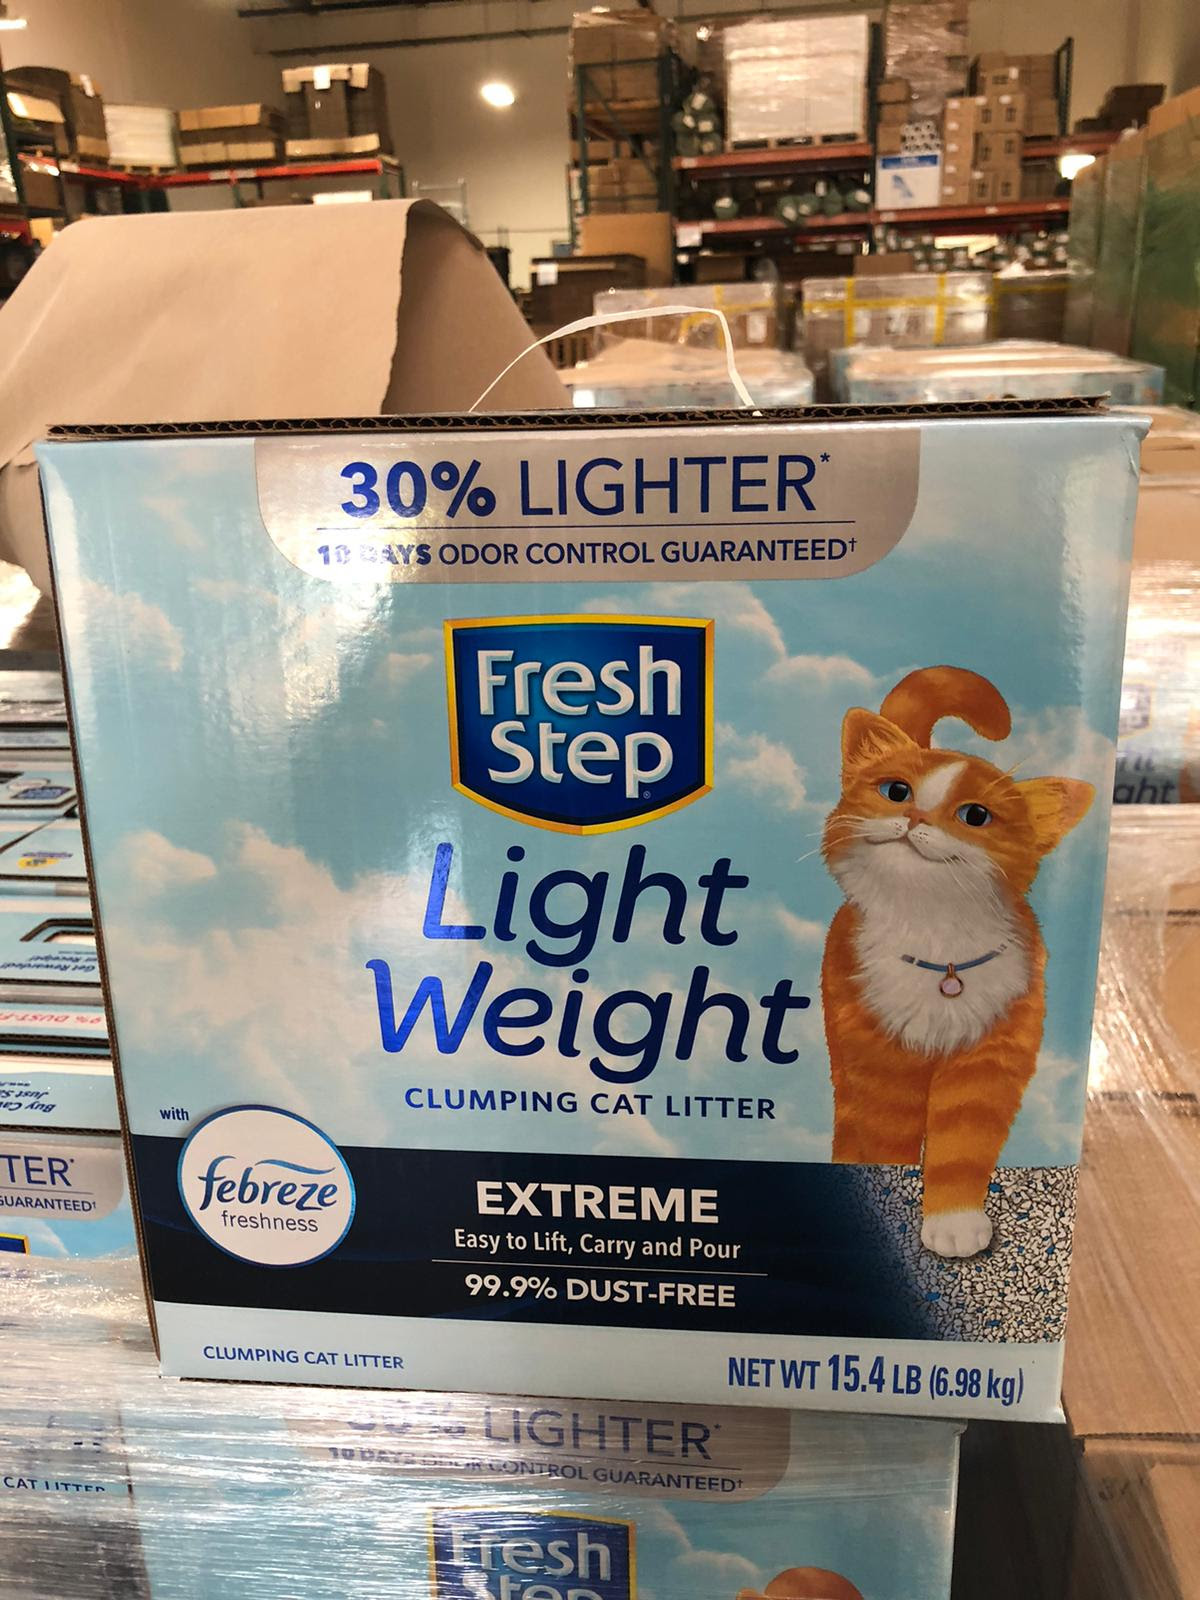 Fresh Step Lightweight Clumping Cat Litter, Odor Control With Febreze, 15.4 lbs & 14 lbs. 2268 Boxes. EXW Los Angeles $8.75 box.